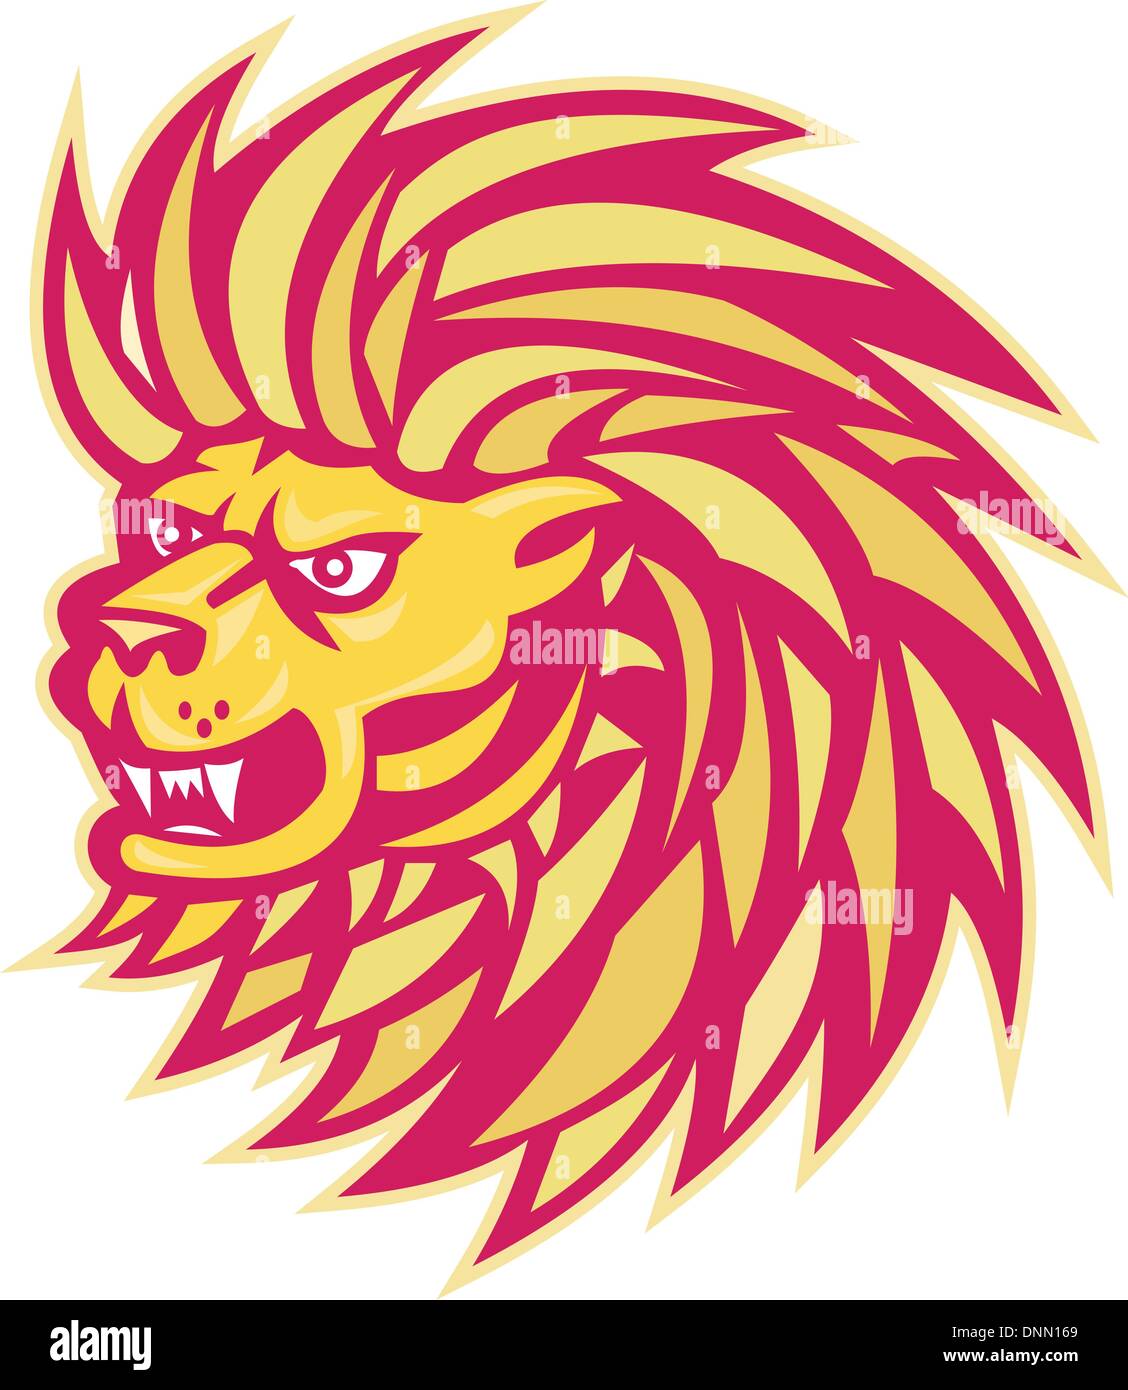 Illustration of an angry lion head facing side done in retro style. Stock Vector